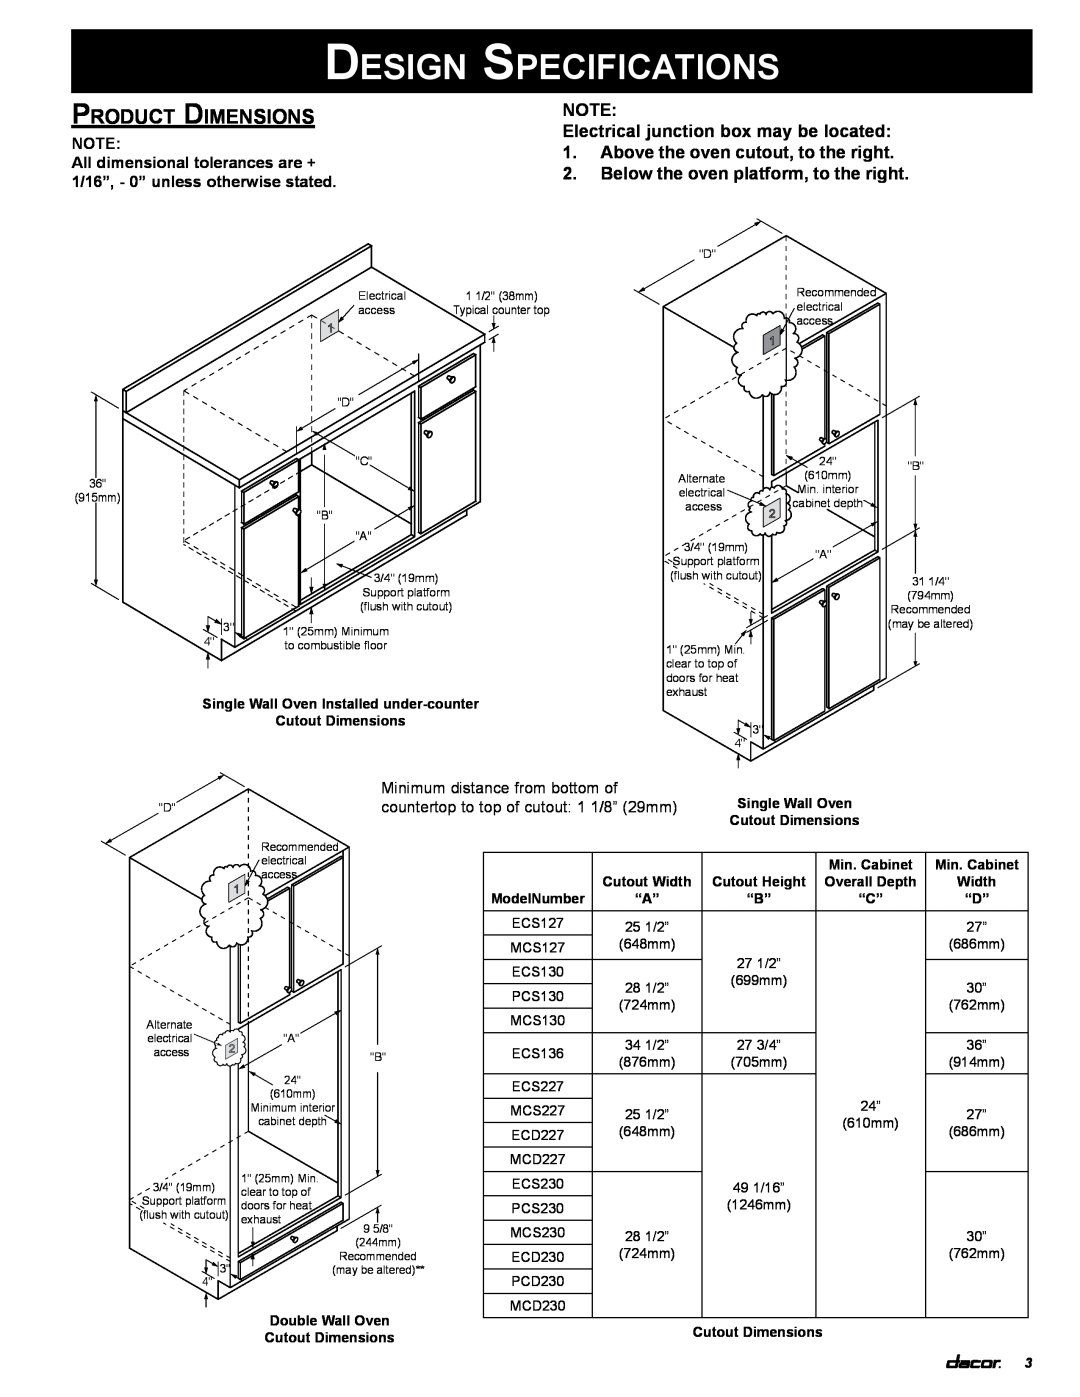 Dacor ECS127, MCD227 Design Specifications, Product Dimensions, Electrical junction box may be located, Min. Cabinet 